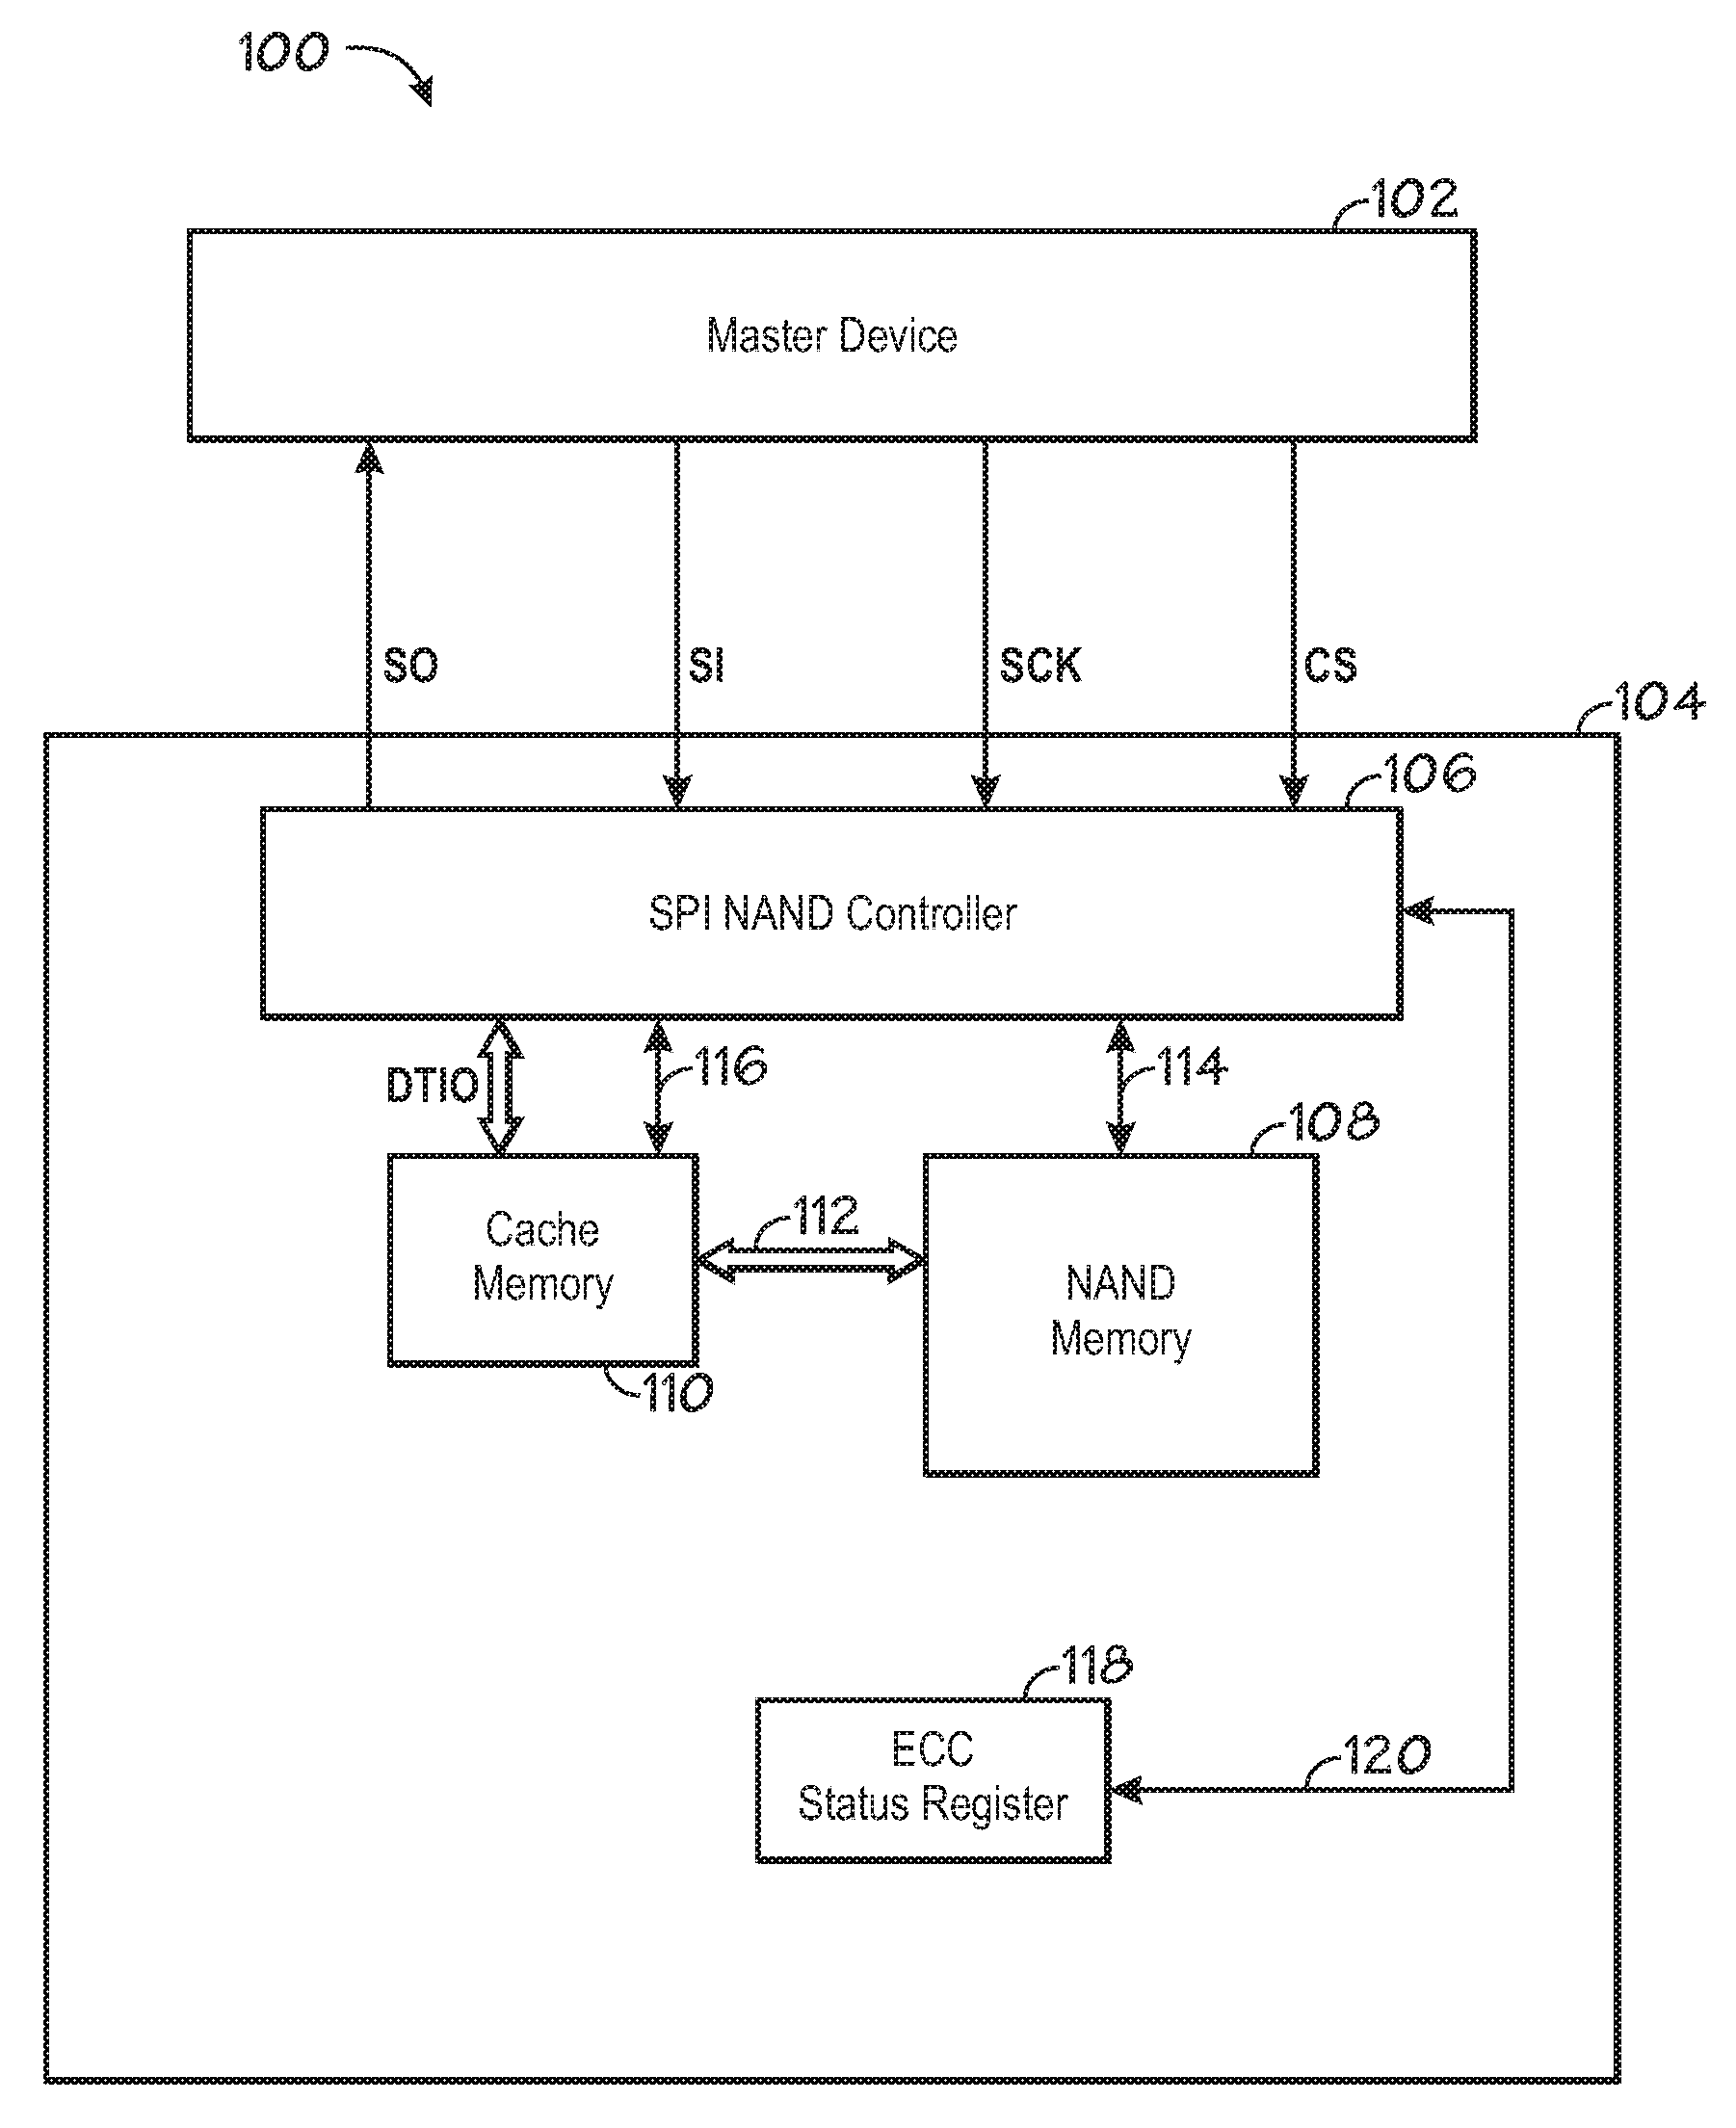 System and method for data read of a synchronous serial interface NAND